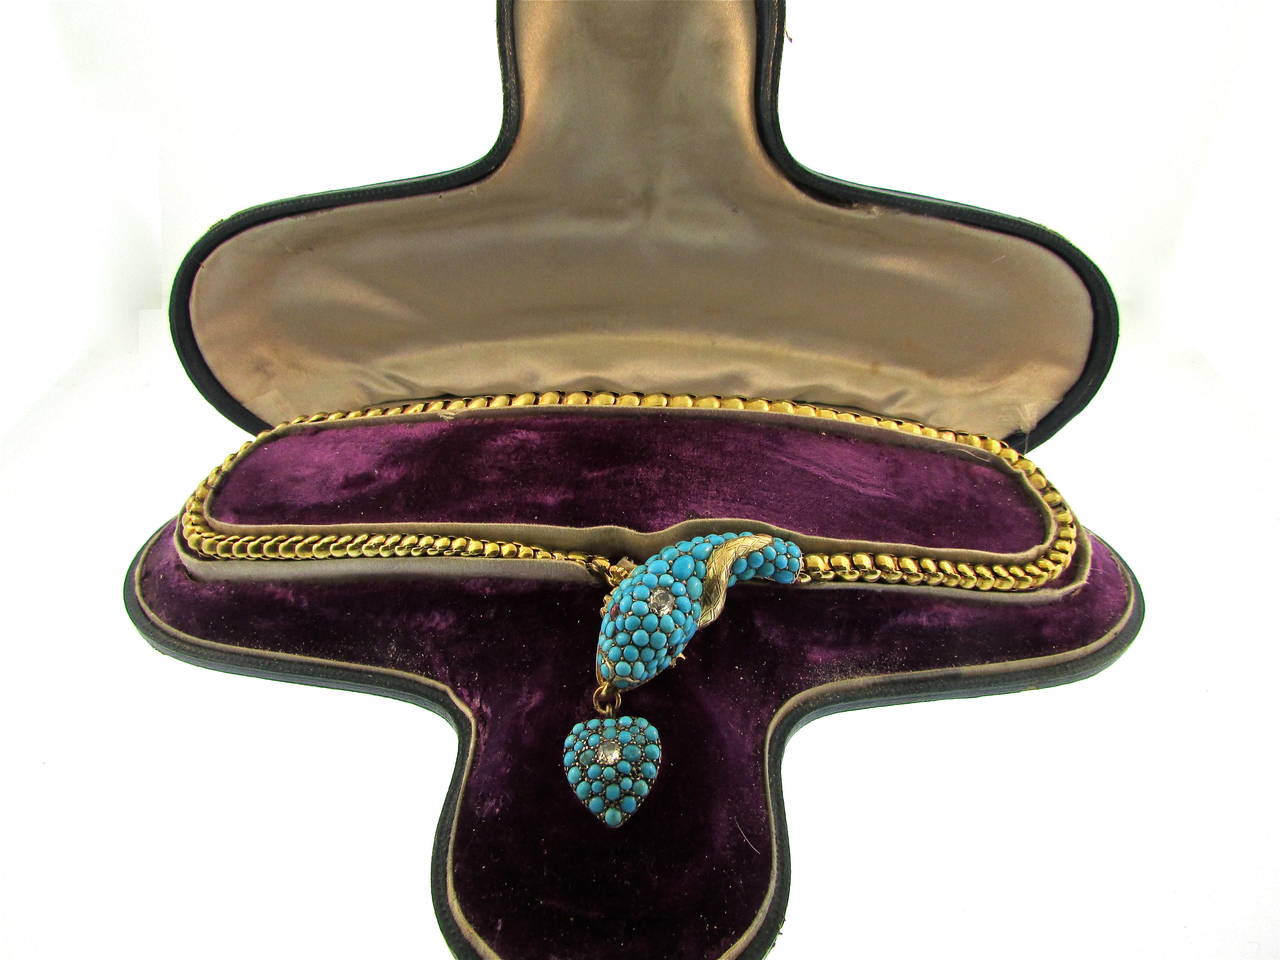 Sizeable, Glorious Victorian Turquoise, Ruby and Diamond Snake Necklace
15K Gold
In its original box
English
Circa 1880

Snakes were a popular Victorian motif, signifying eternal love.